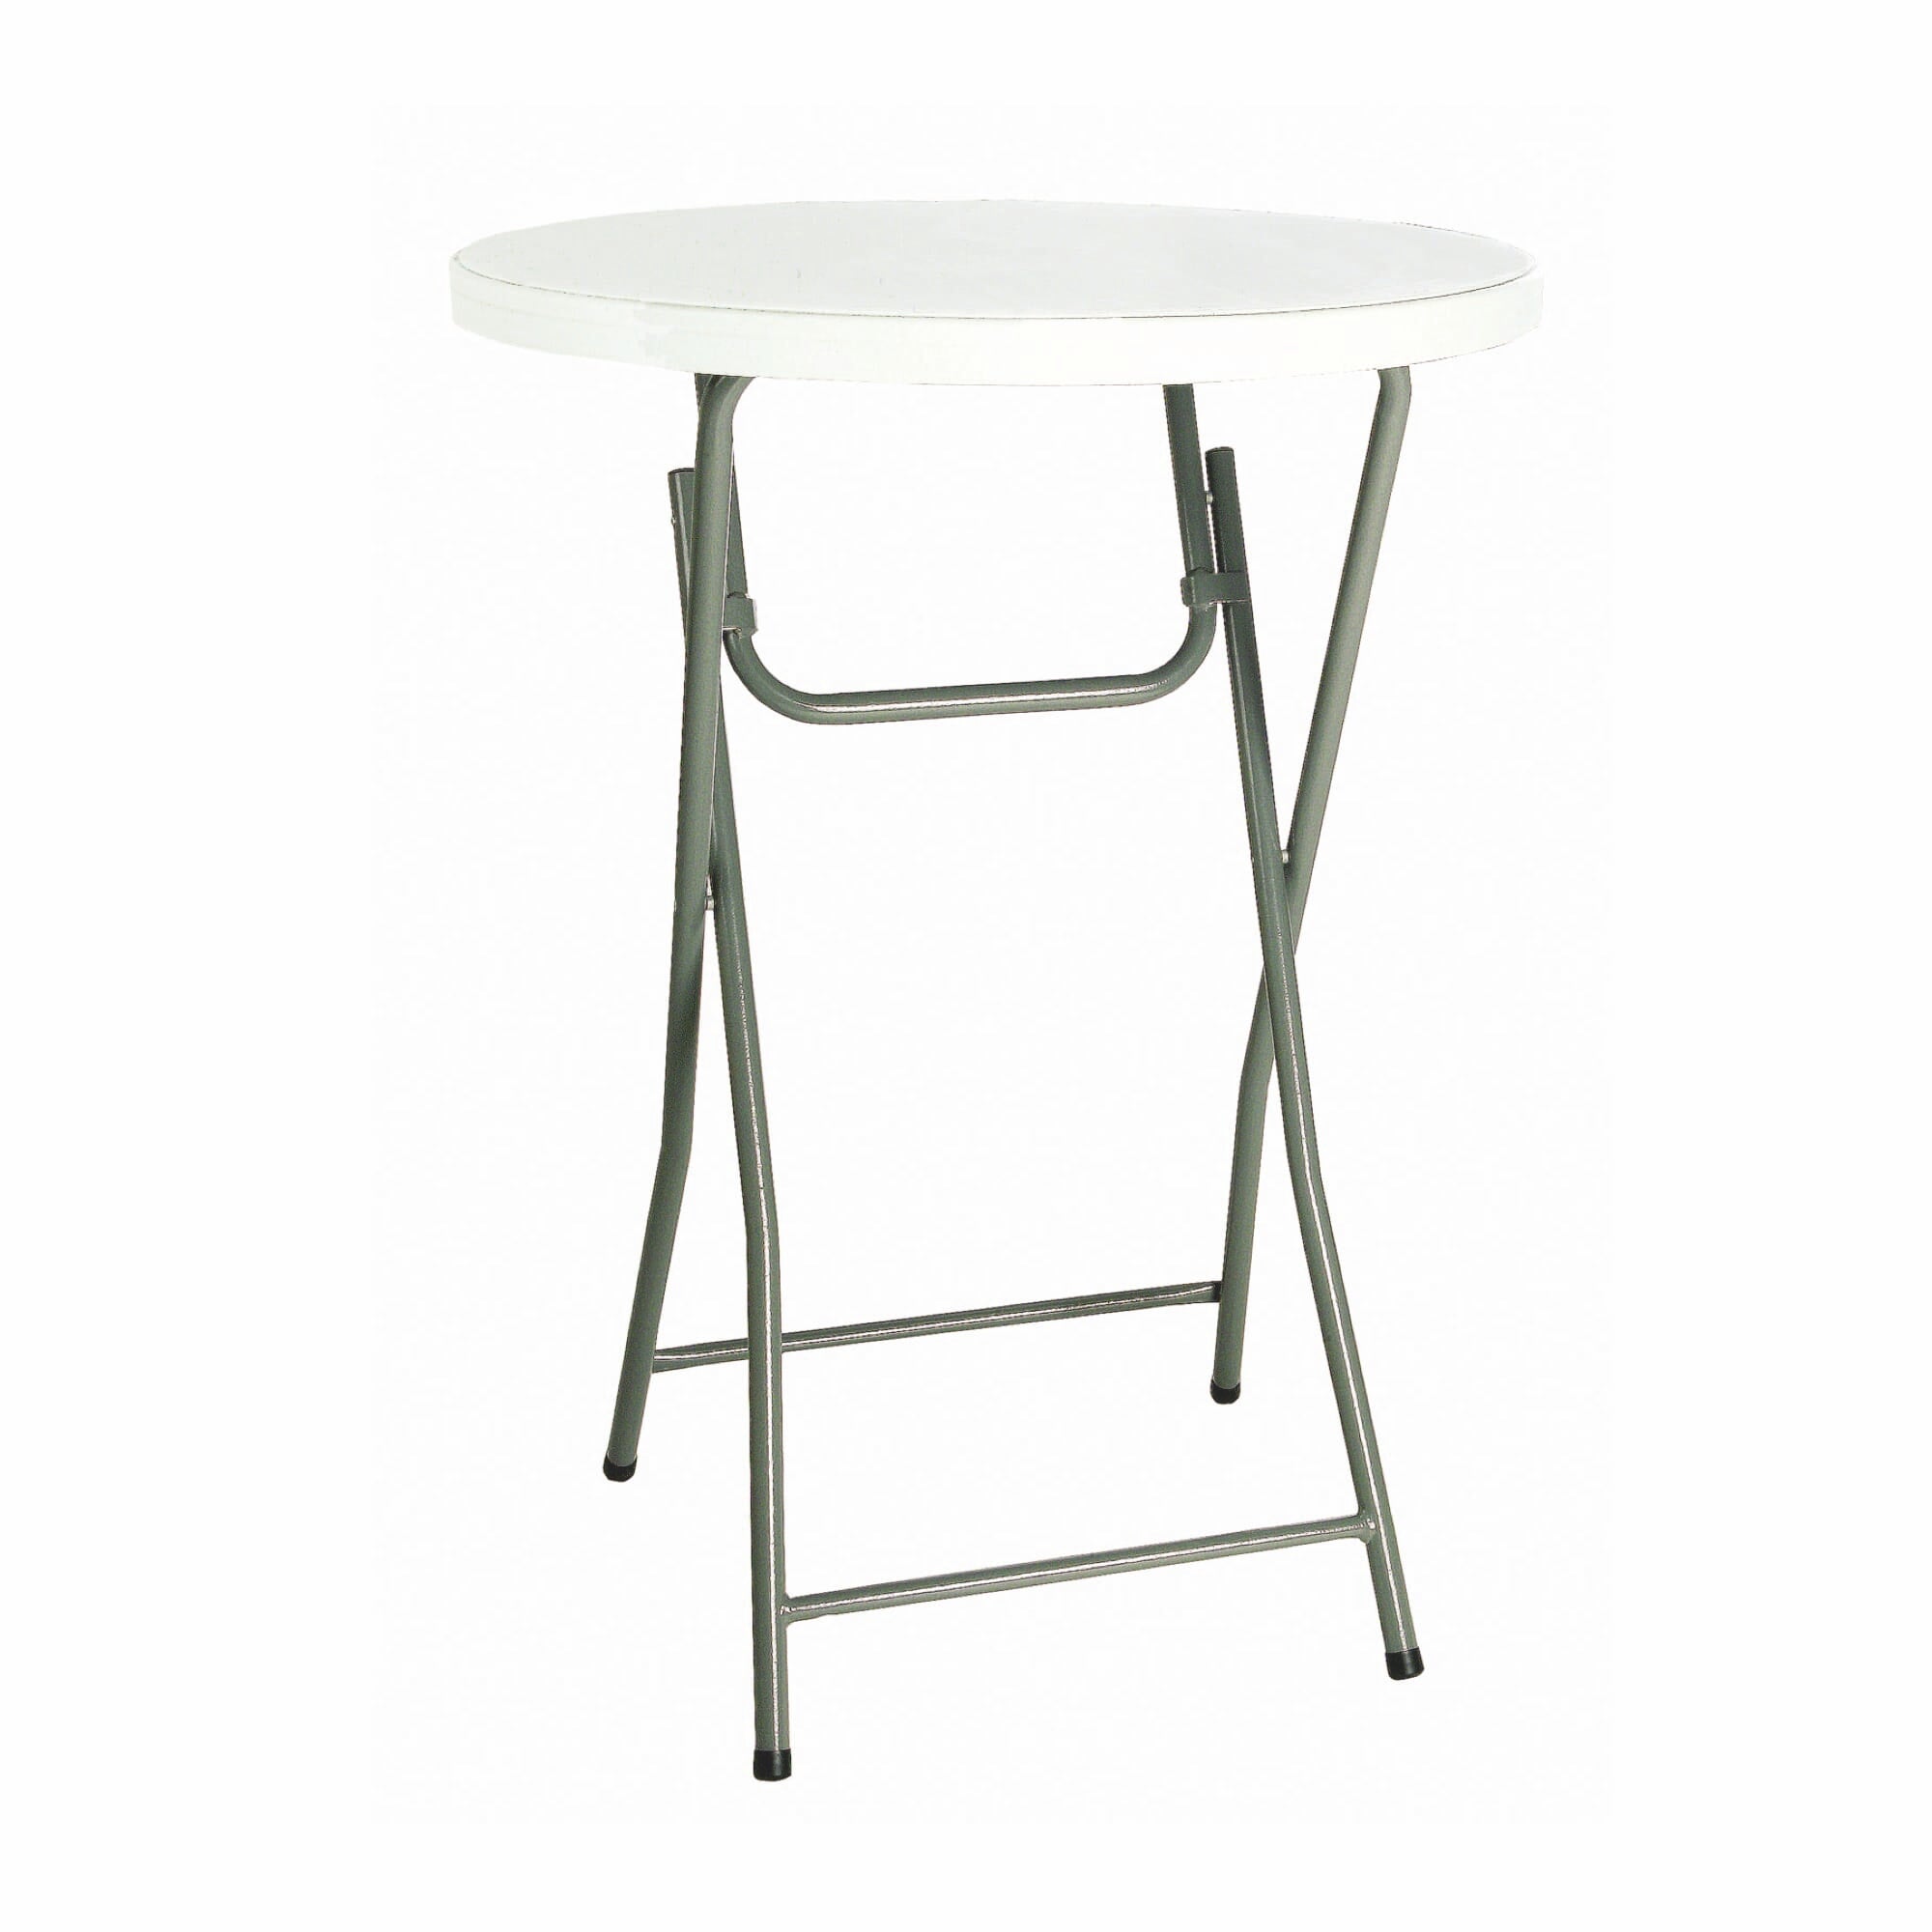 Garbar Hamlet Round Foldable Table indoors, outdoor Ø80 gray